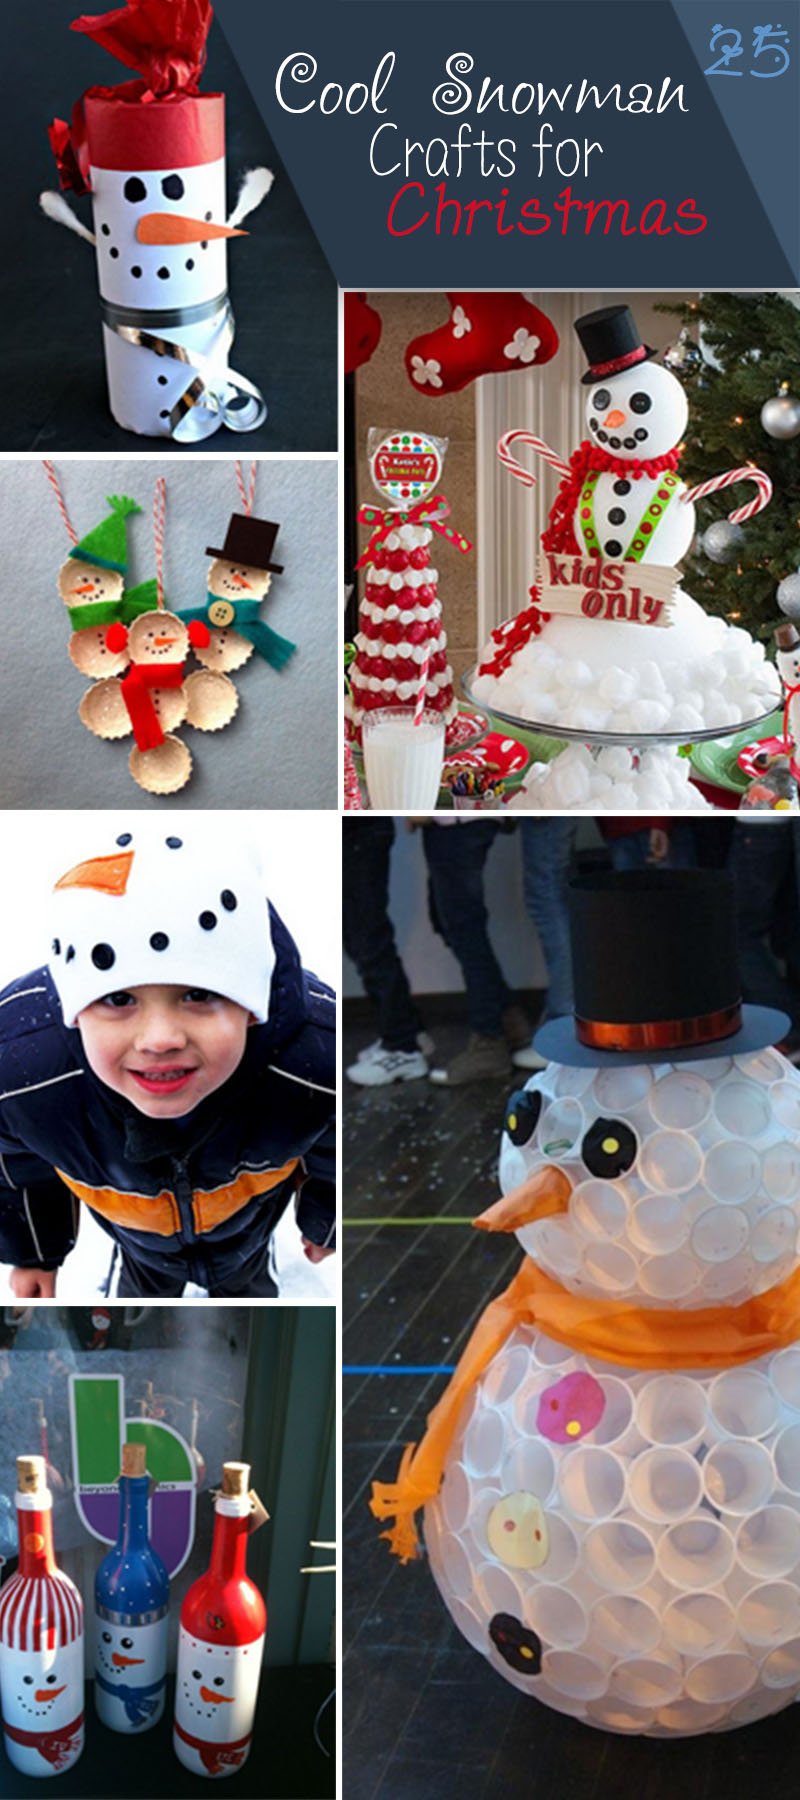 Cool Snowman Crafts for Christmas!